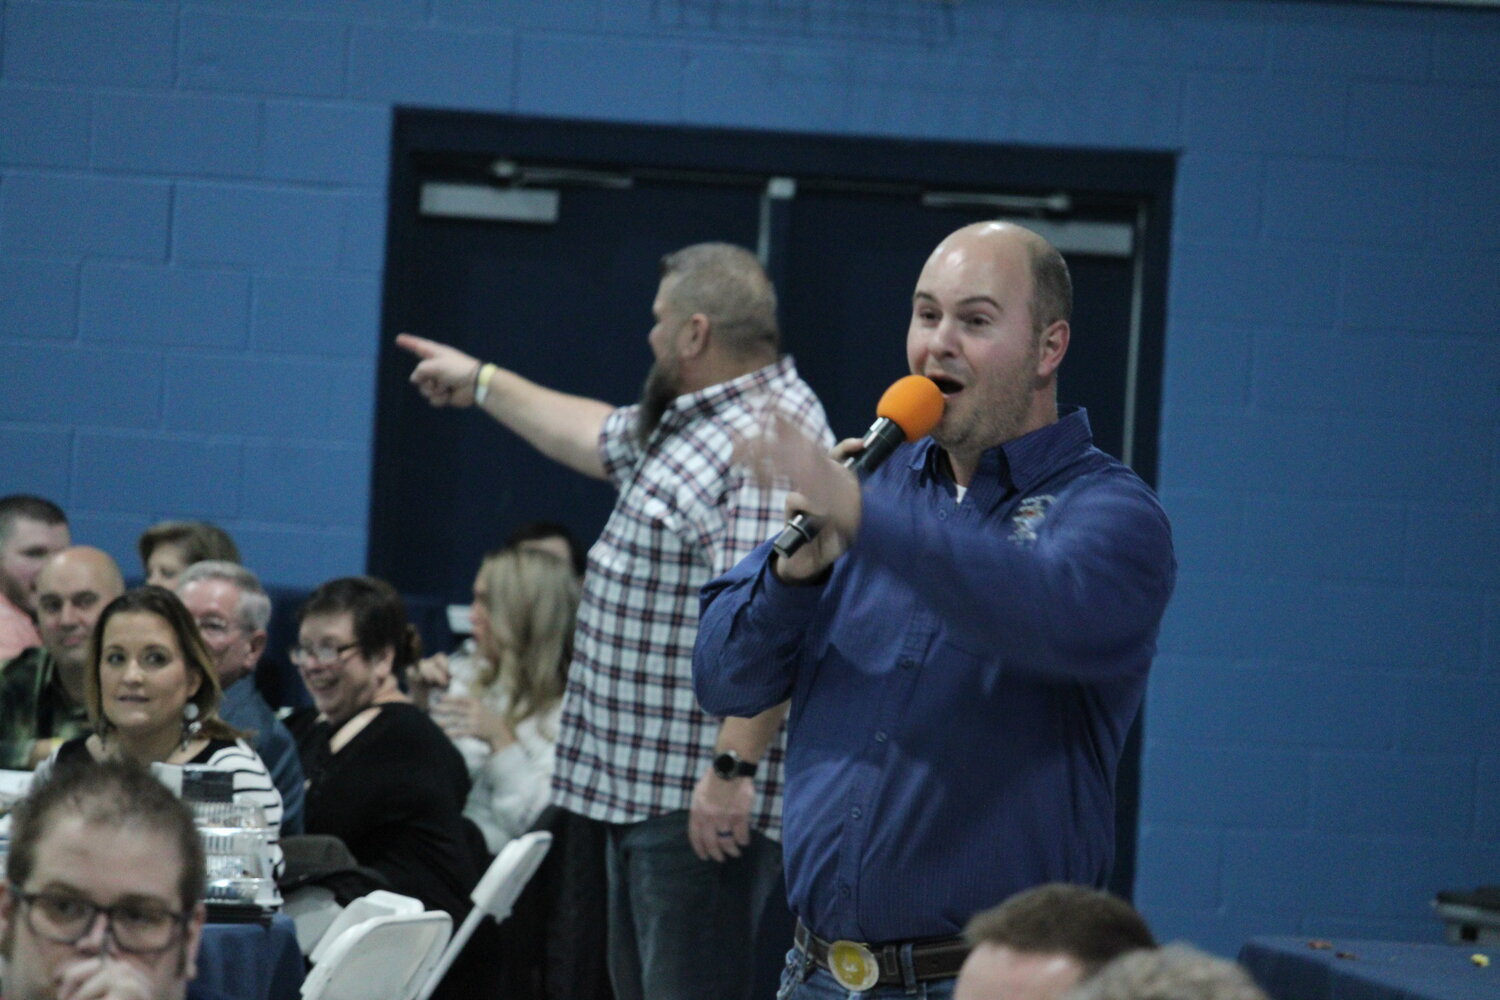 Auctioneer Dusty Thornhill recognizes a bidder while Scott Taylor watches for another during the Holy Rosary Catholic School dinner auction on Jan. 27.